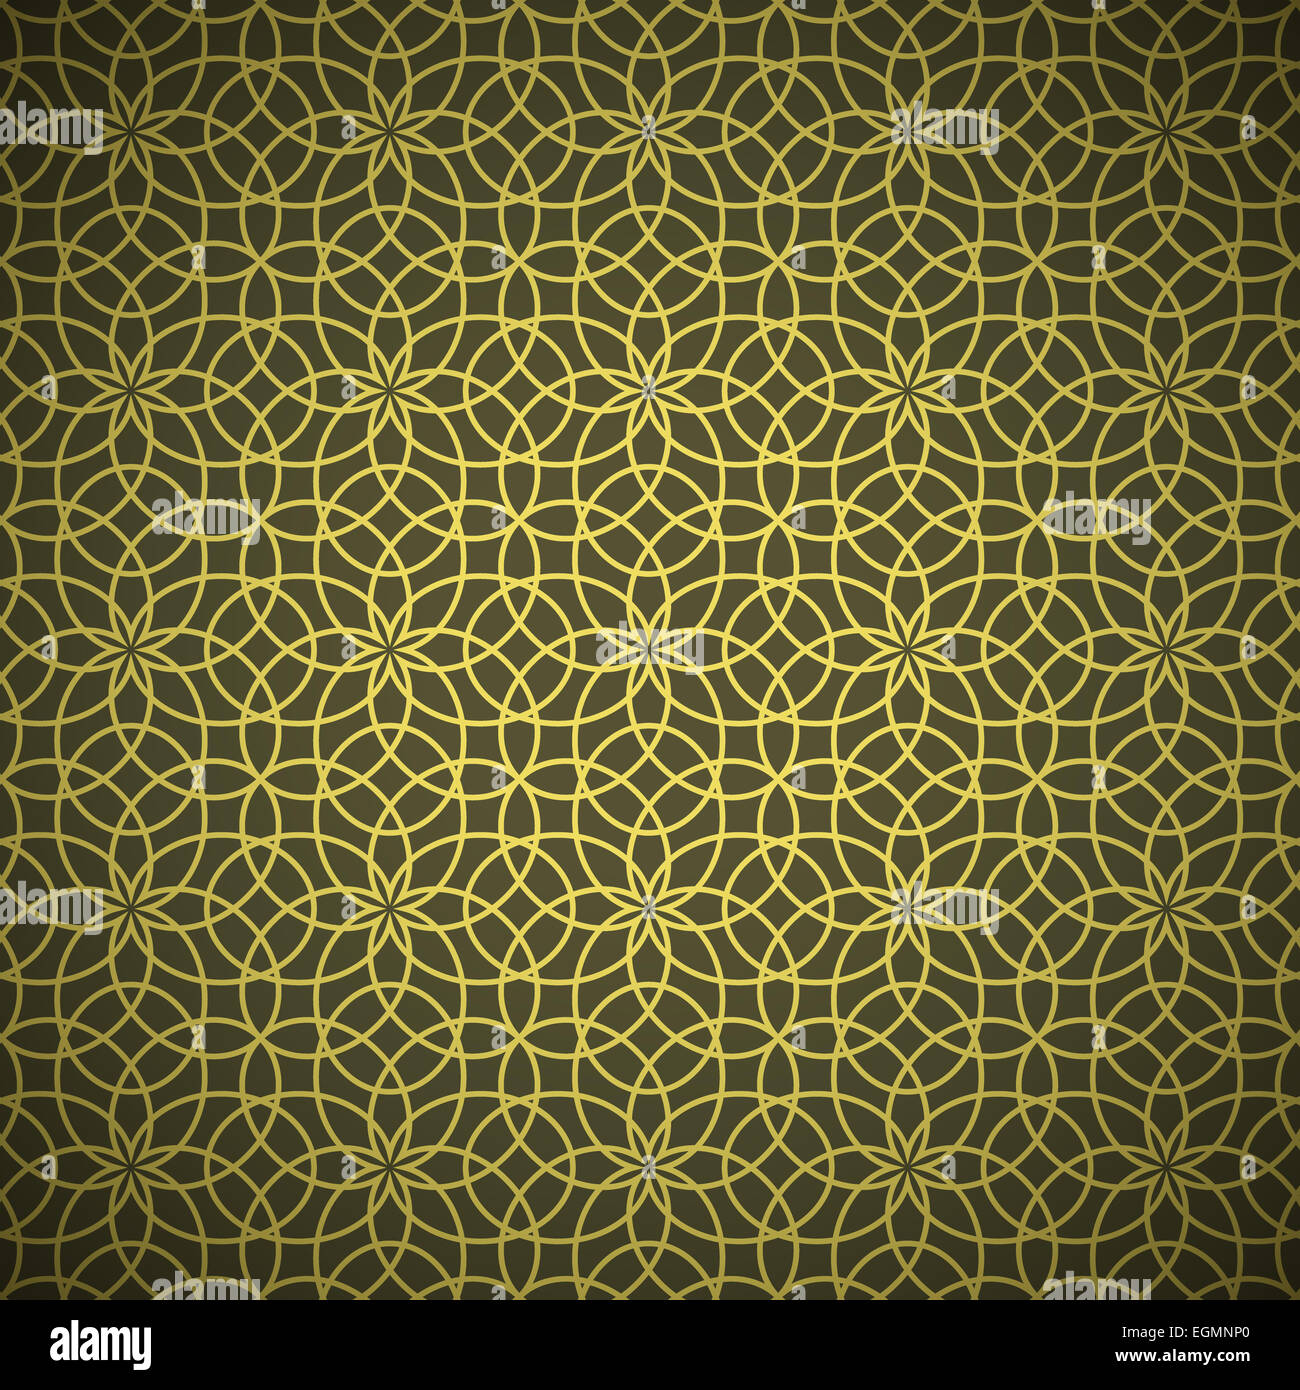 Abstract forged golden flower pattern Stock Photo